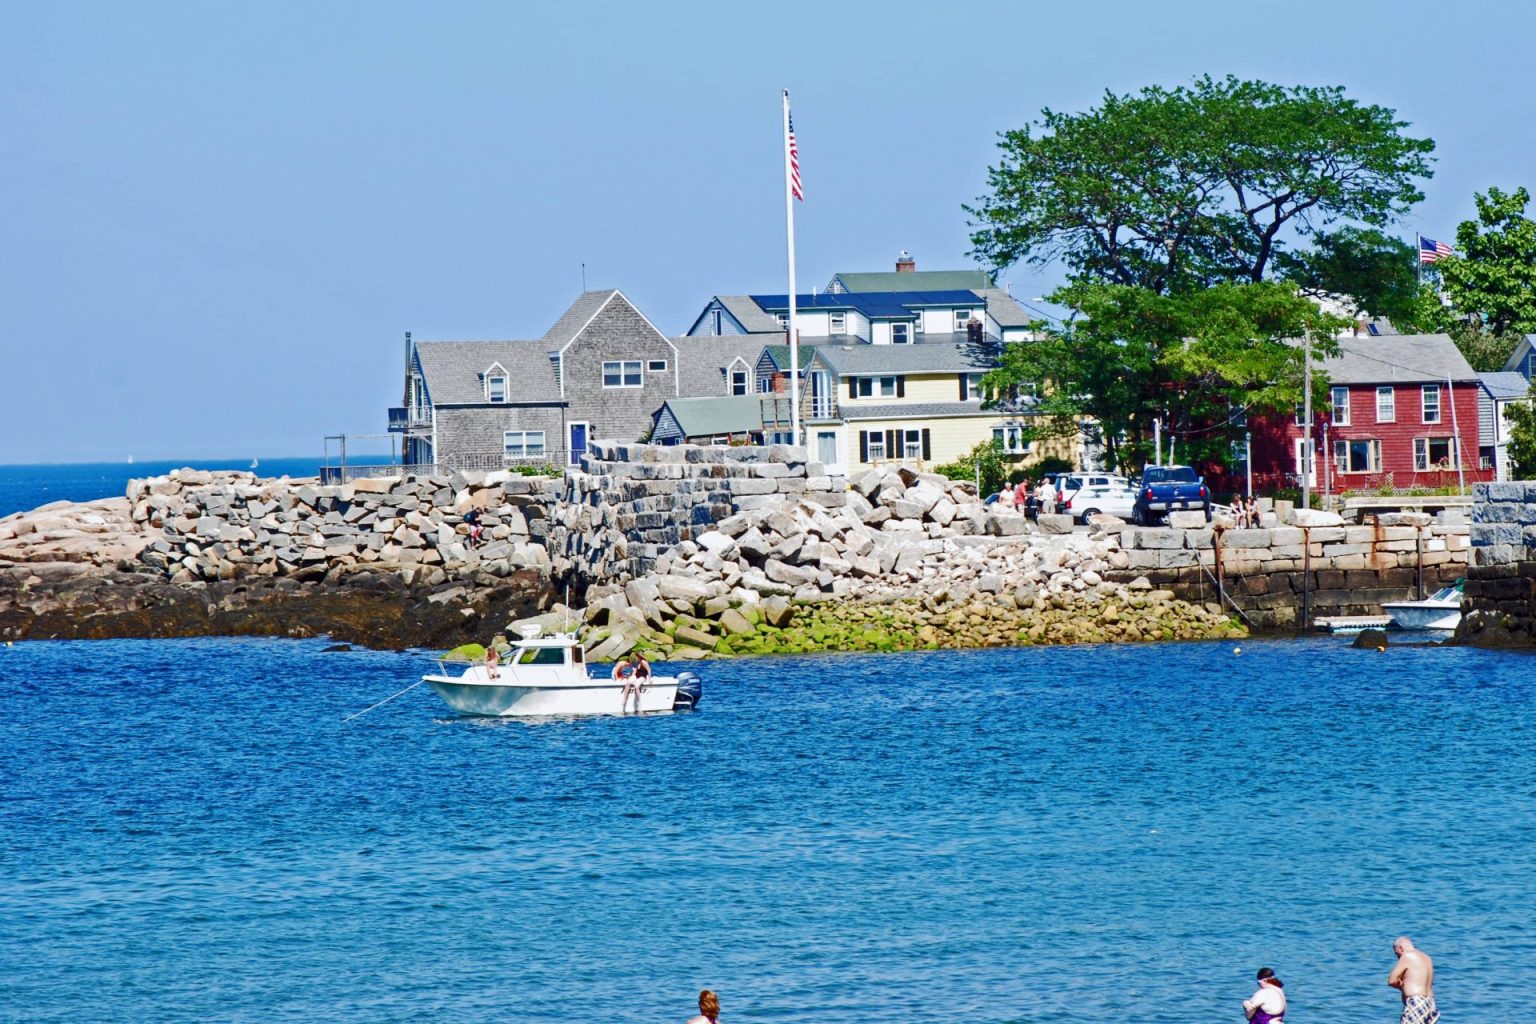 A view of a point on Cape Ann taht has docks, a flag pole, and various New England styled building perched on top of a rock wall